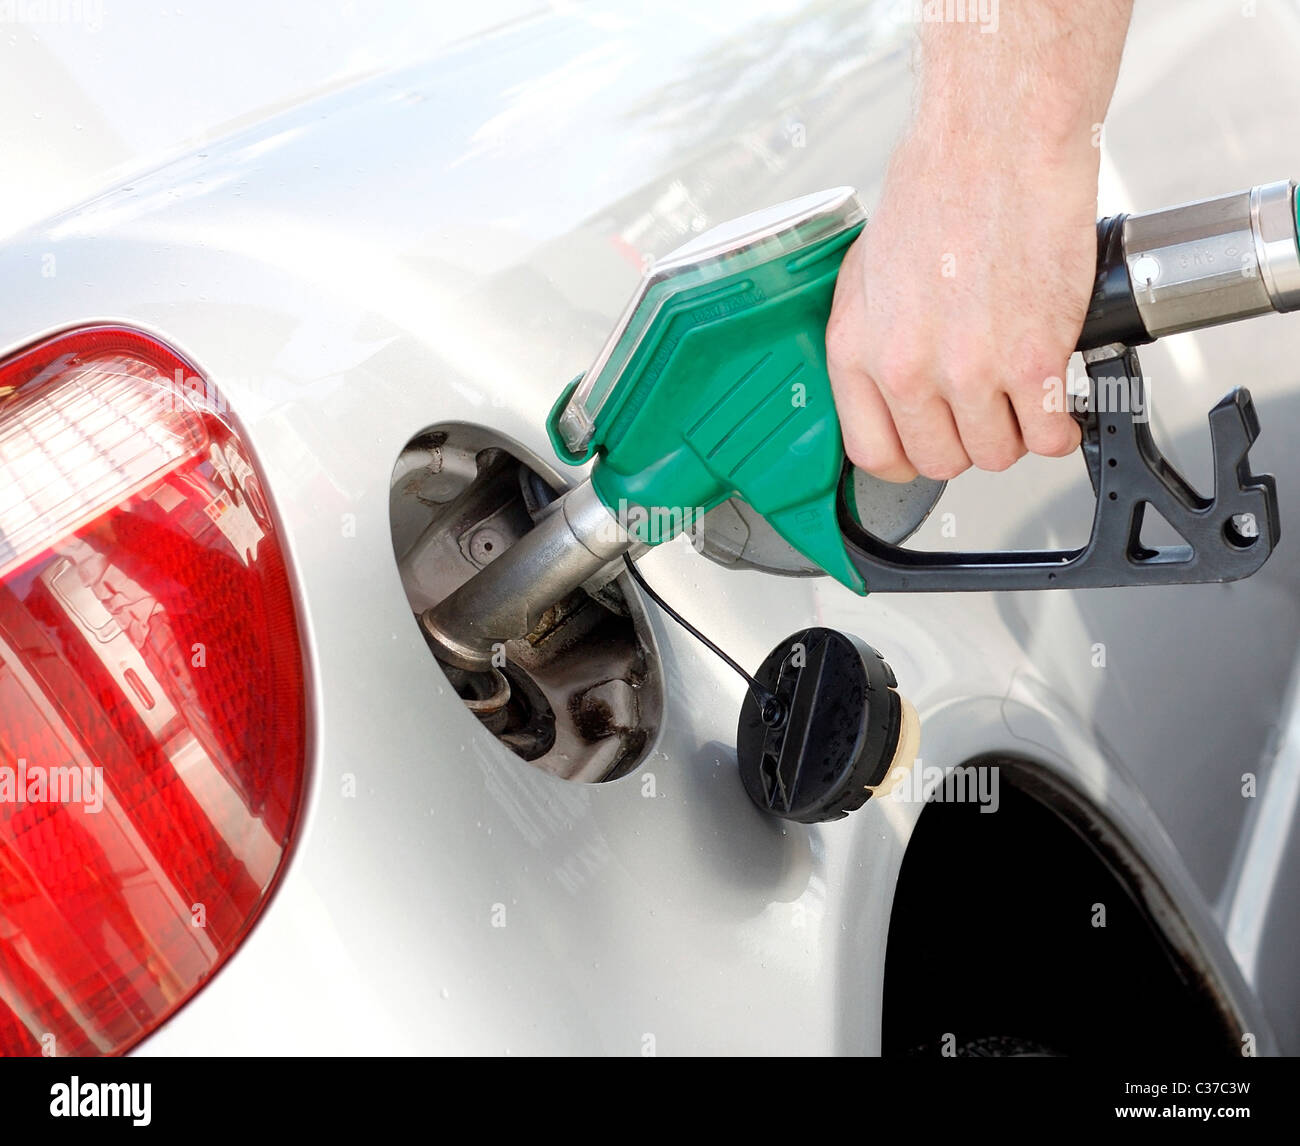 A man pumping gas in to the tank Stock Photo